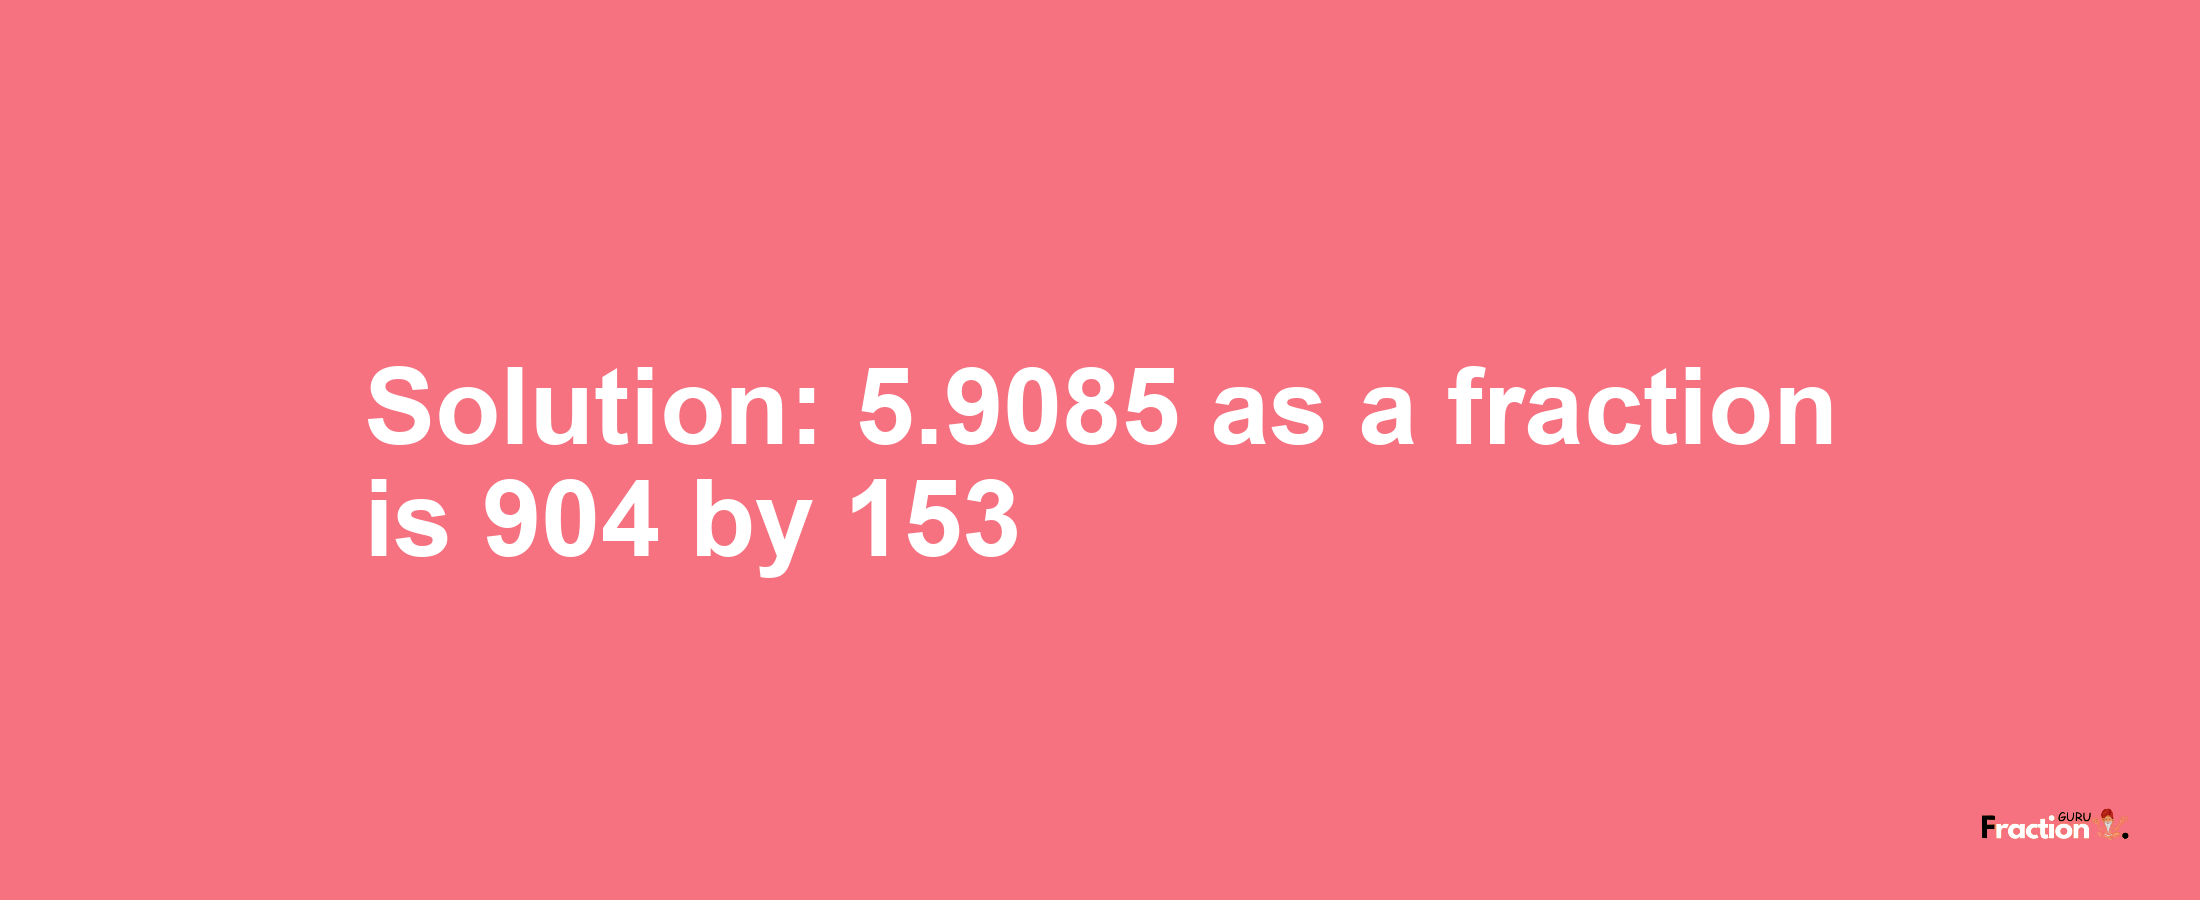 Solution:5.9085 as a fraction is 904/153